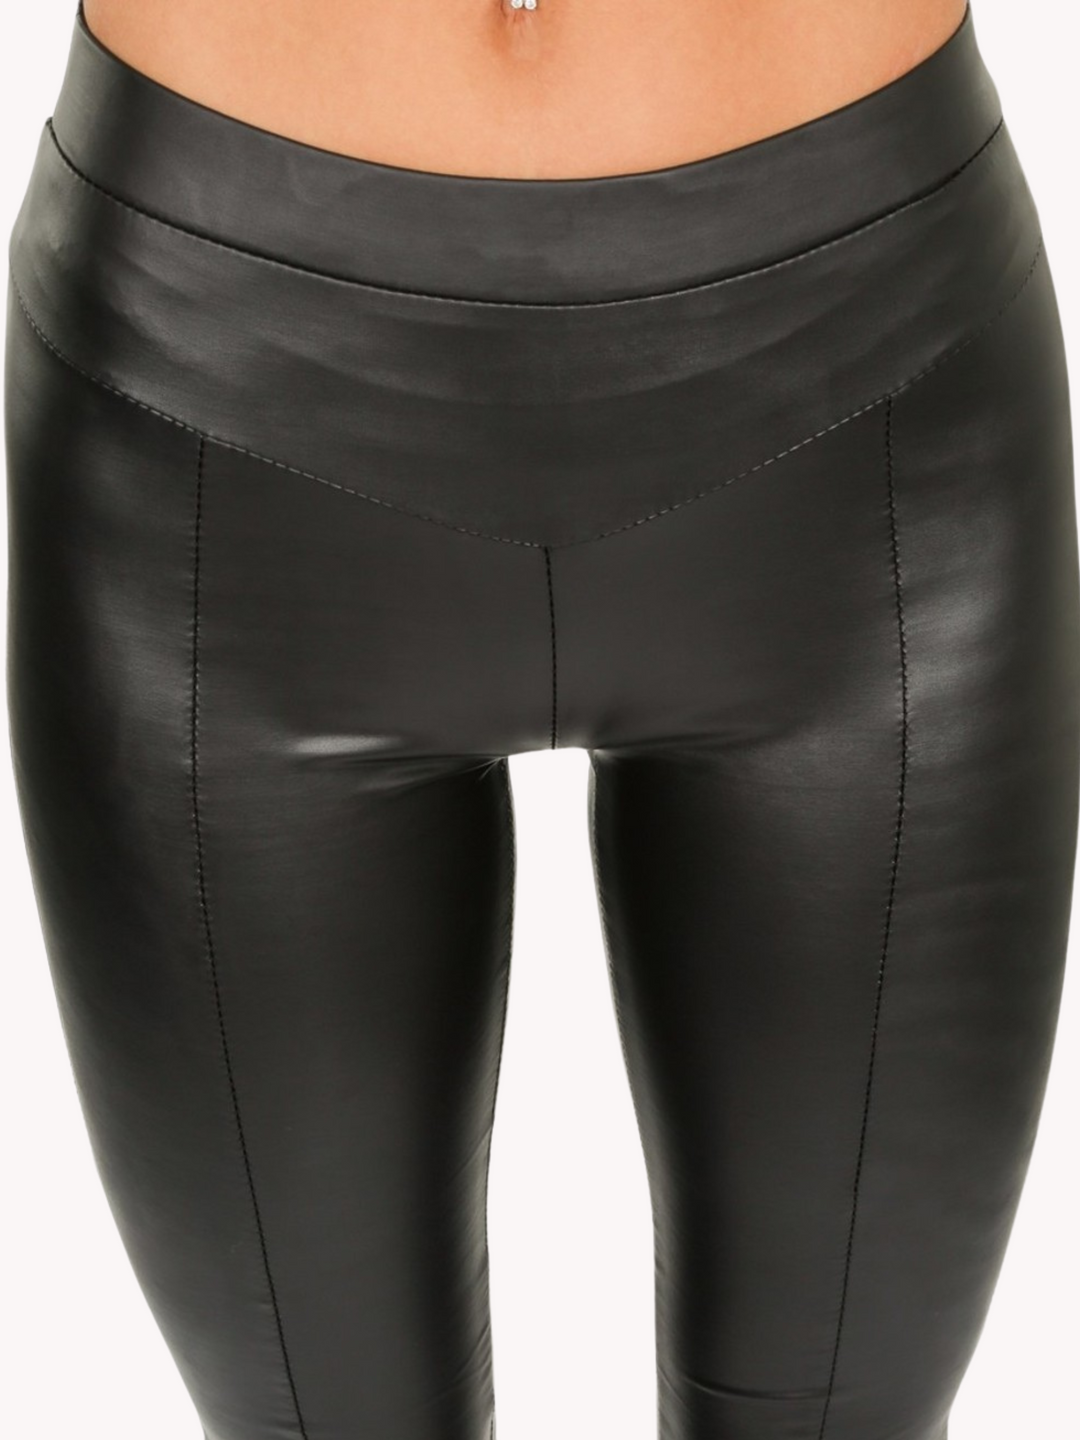 Model wears a wet look, leather looking leggings with panelling. This faux leather leggings has a bodycon slim fit. The closeup of the leggings can be seen.